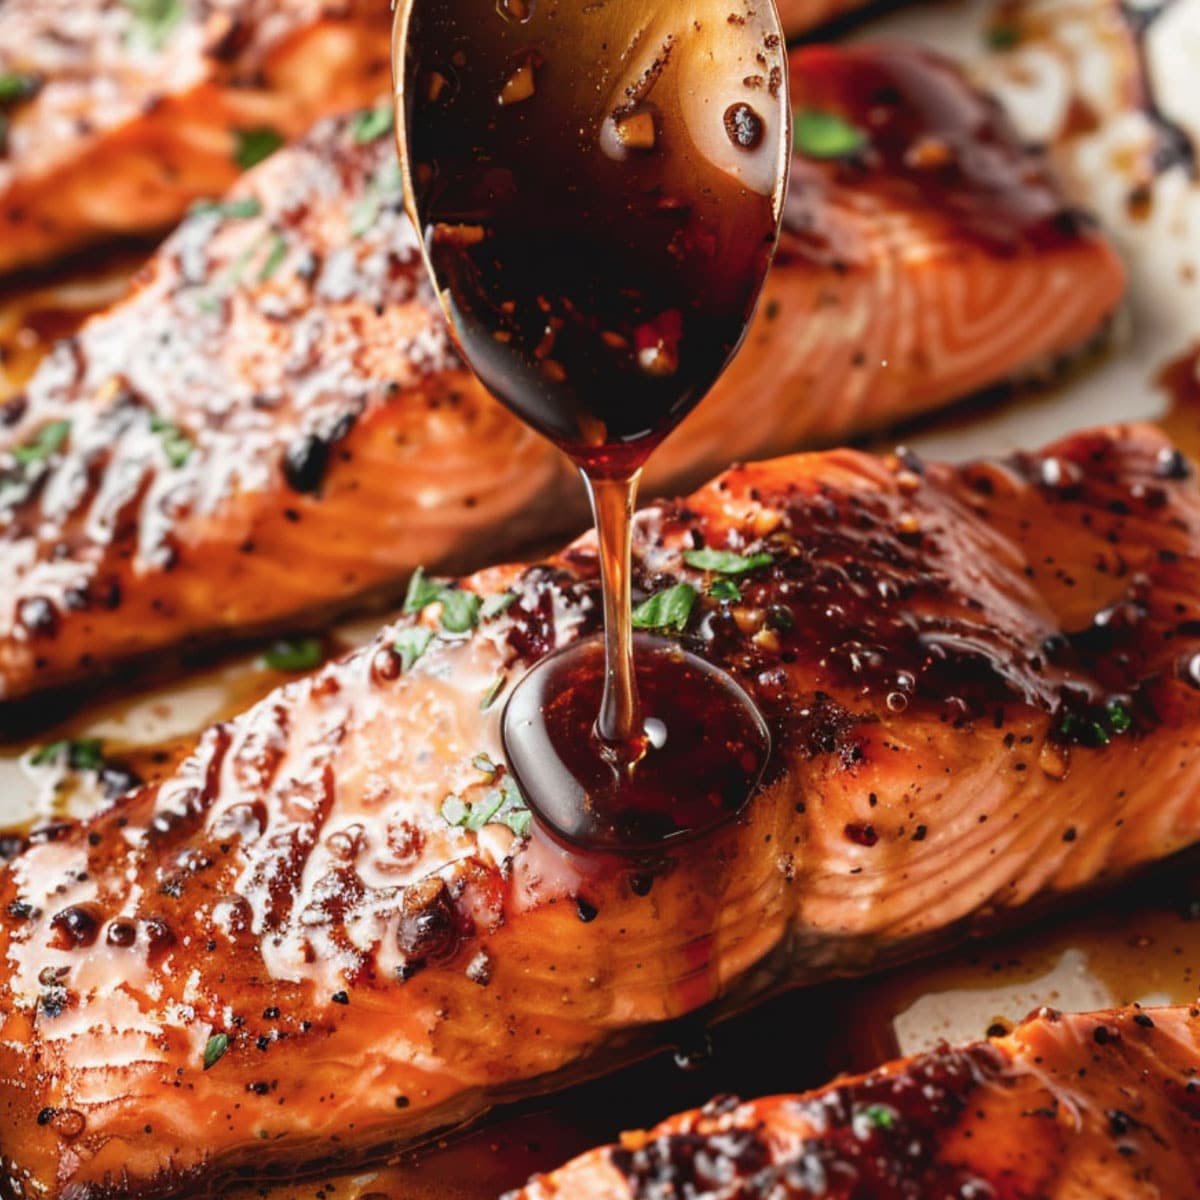 Perfectly cooked honey glazed salmon fillet with a glistening sauce, ready to be served.